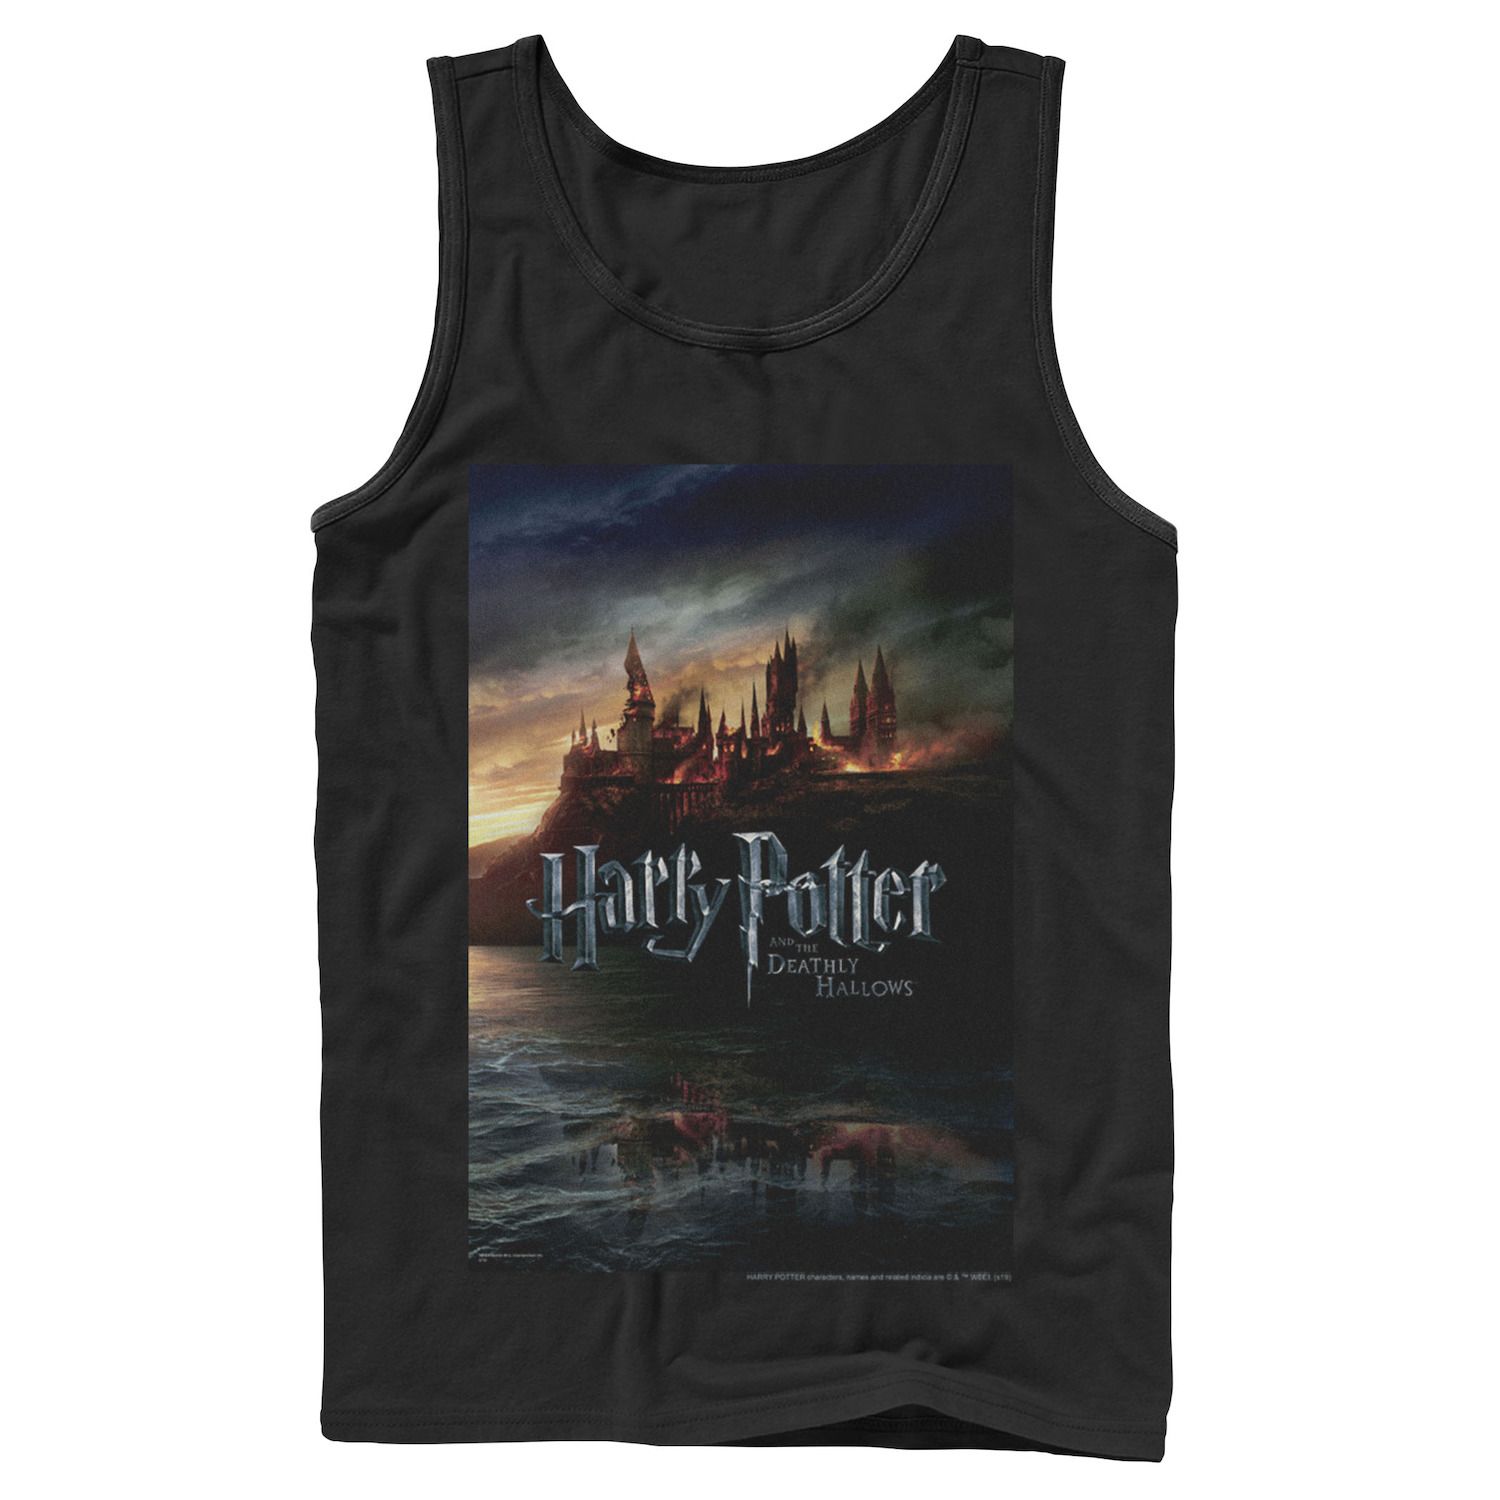 Image for Harry Potter Men's And The Deathly Hallows Hogwarts Poster Graphic Tank Top at Kohl's.